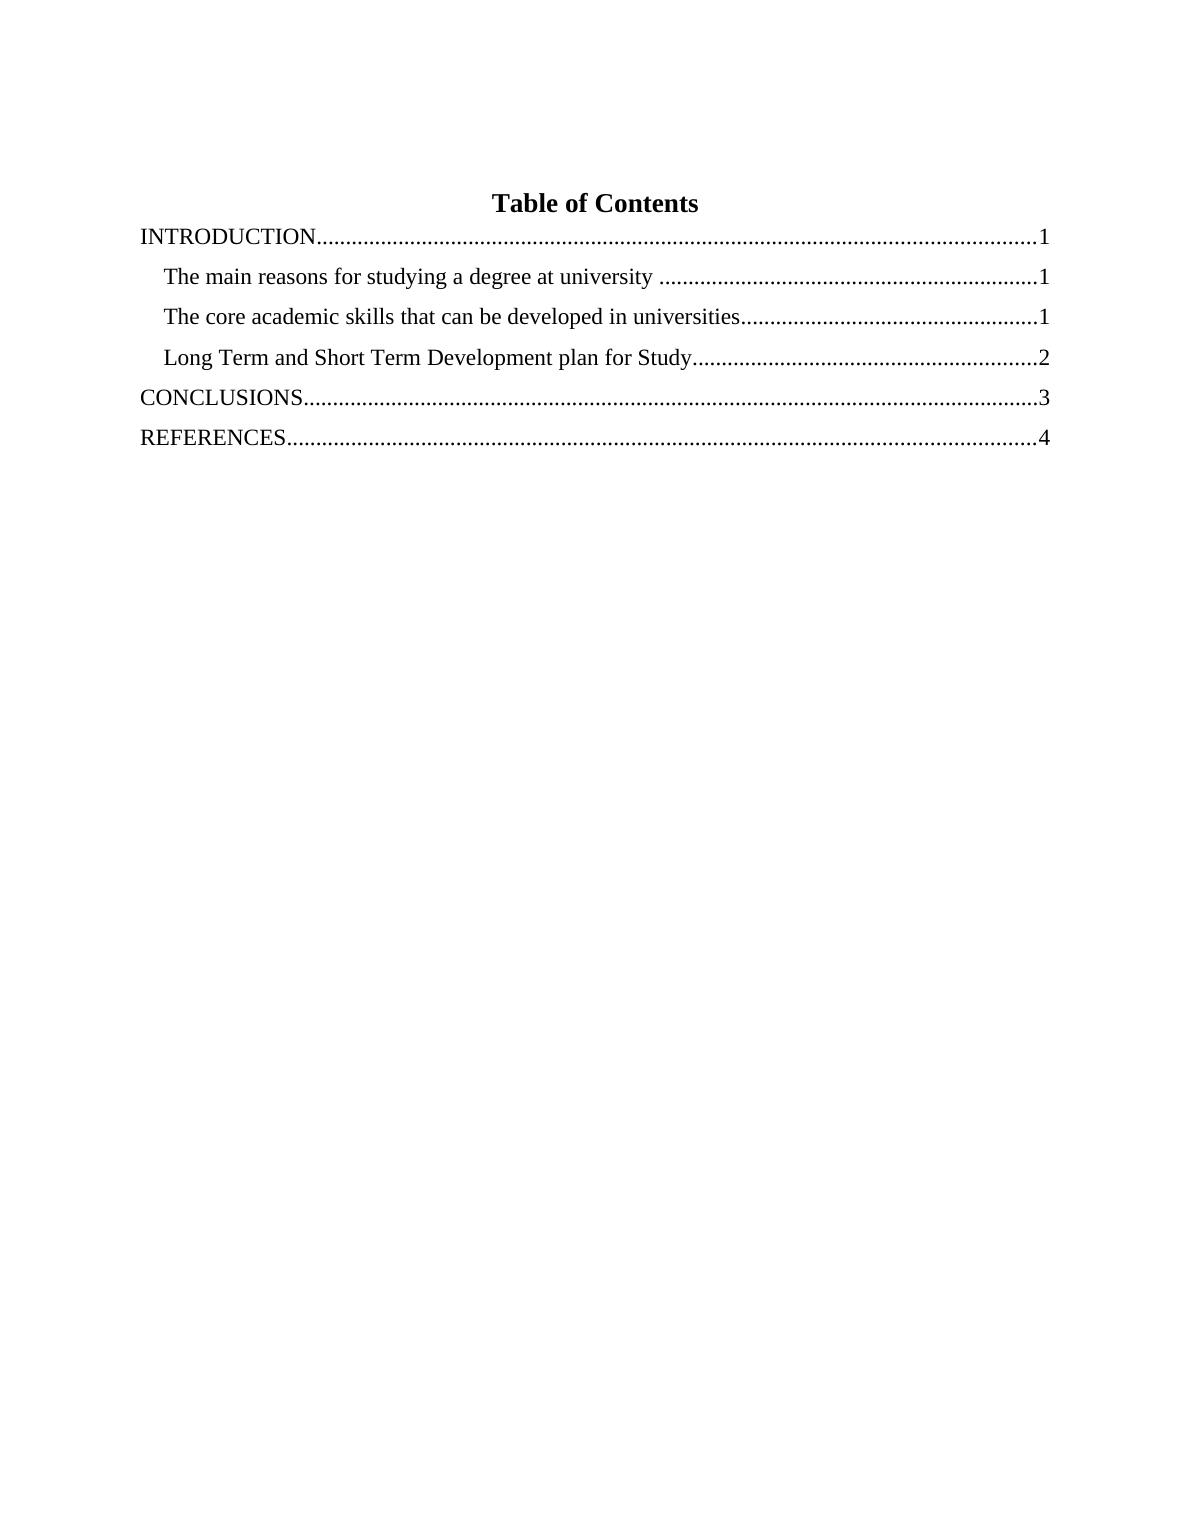 Assignment on Study Skills for Higher Education (pdf)_2